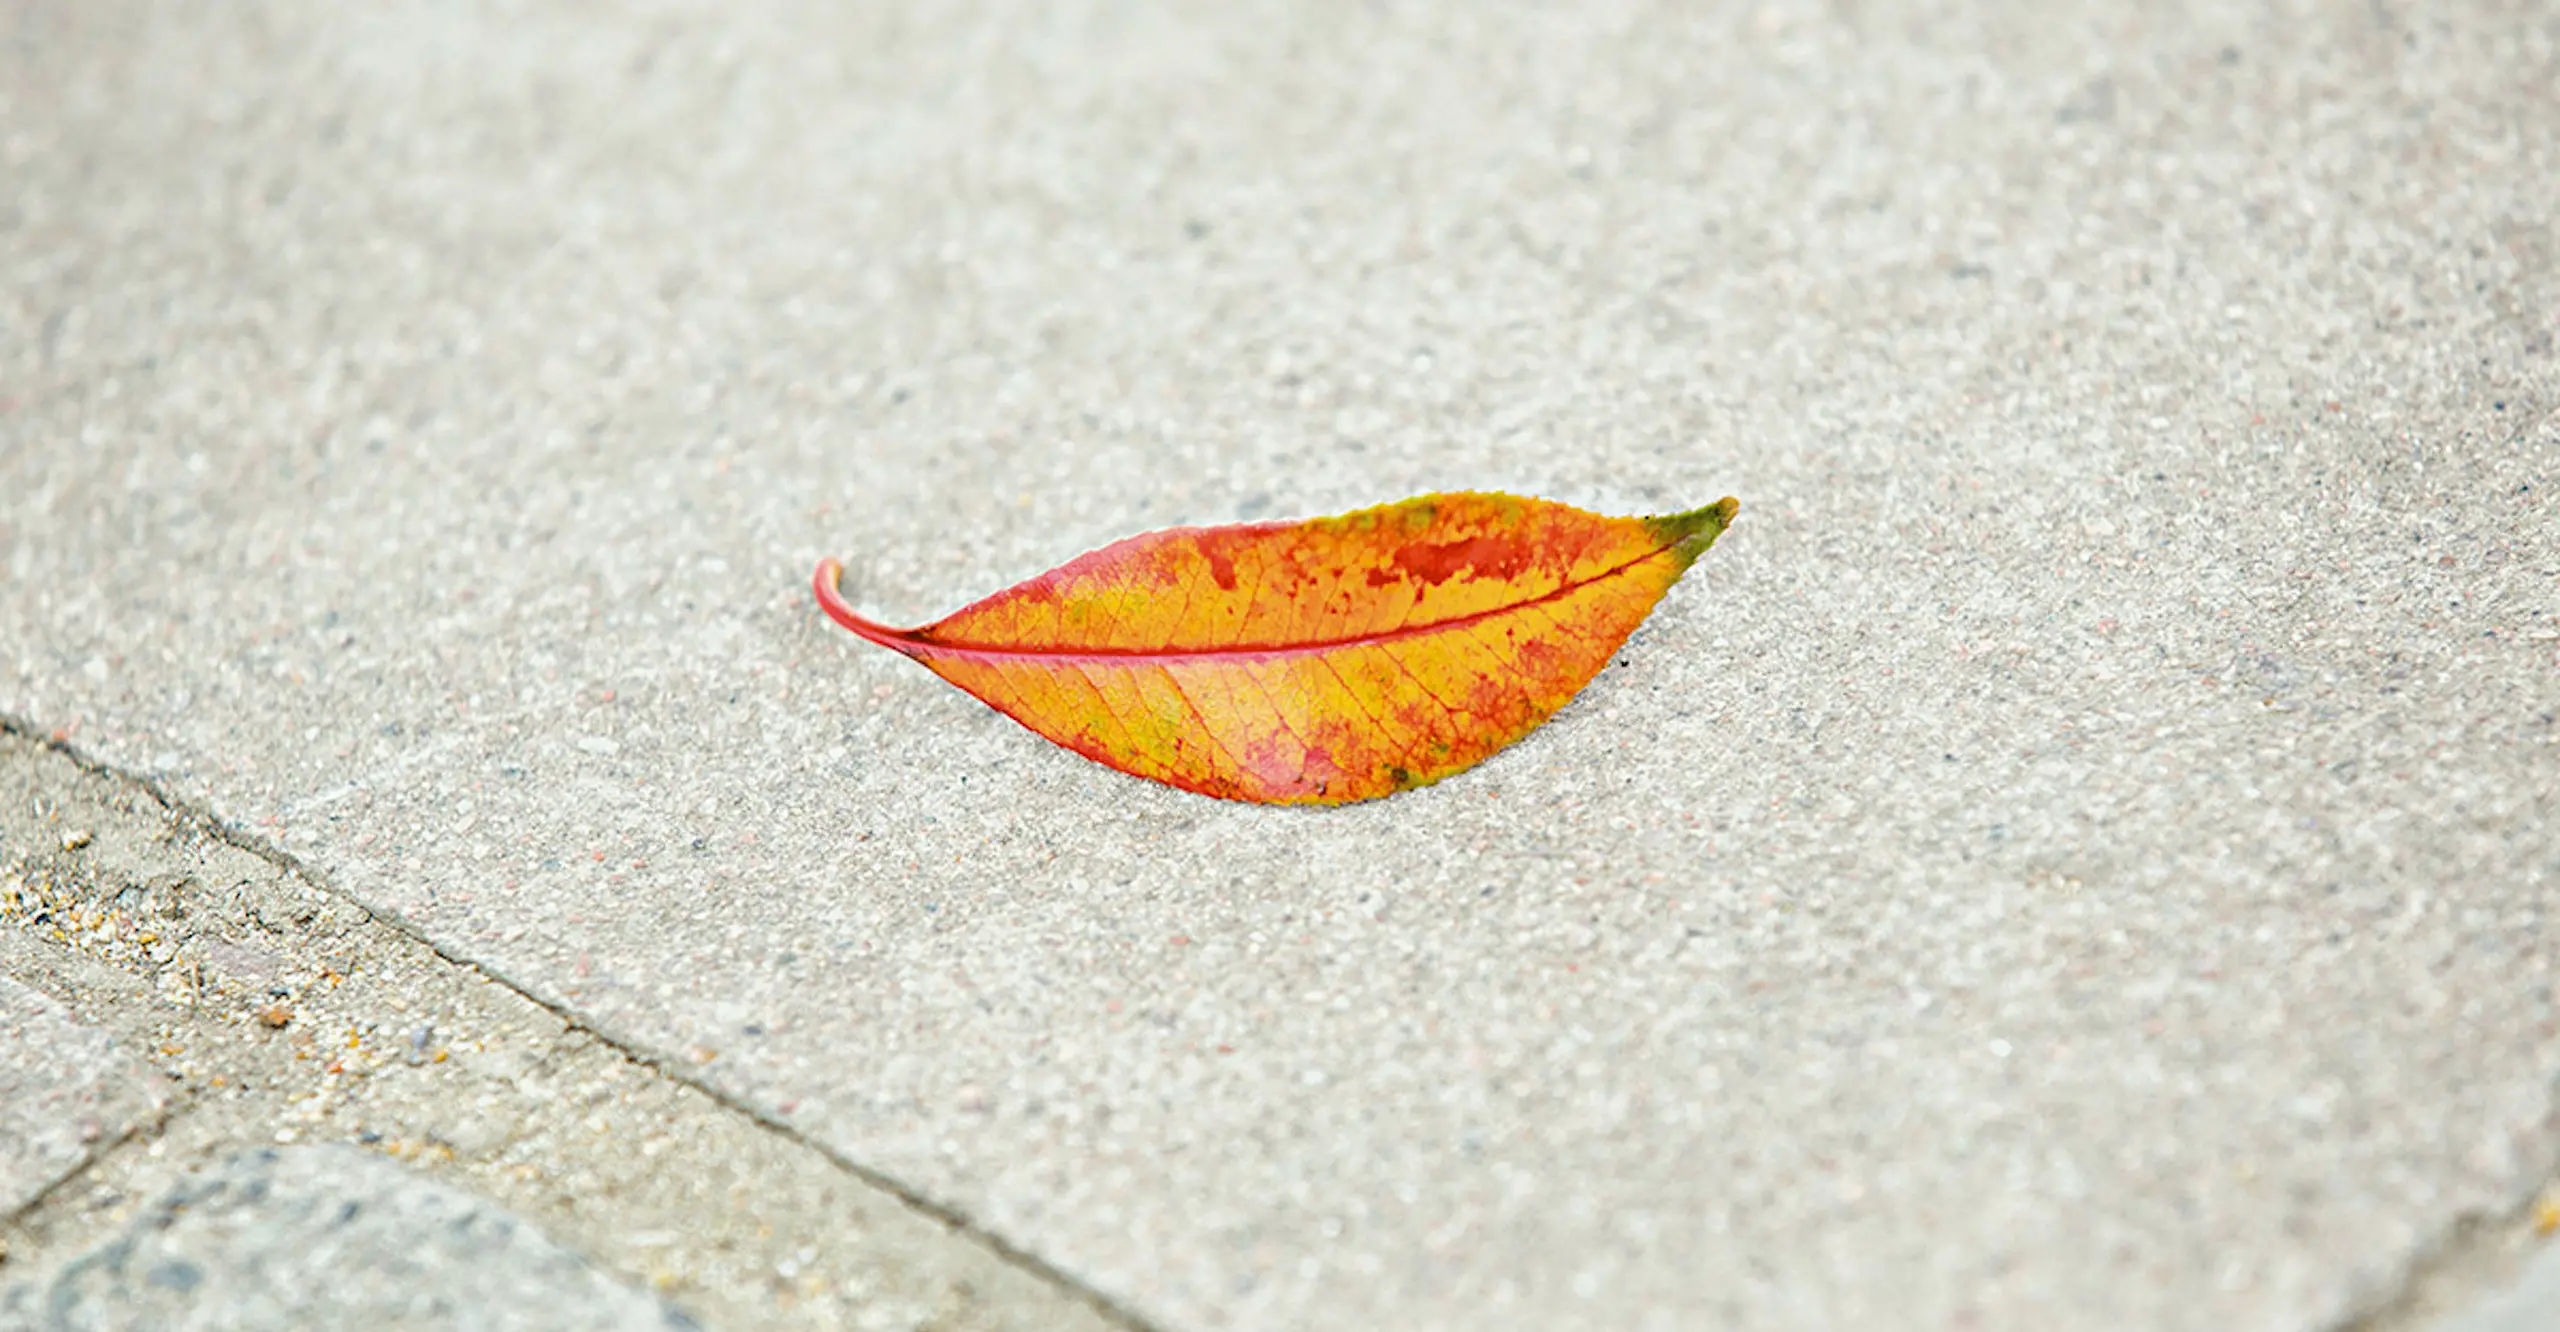 An orange leaf fallen onto grey paving stones forms the shape of wry, smiling lips.